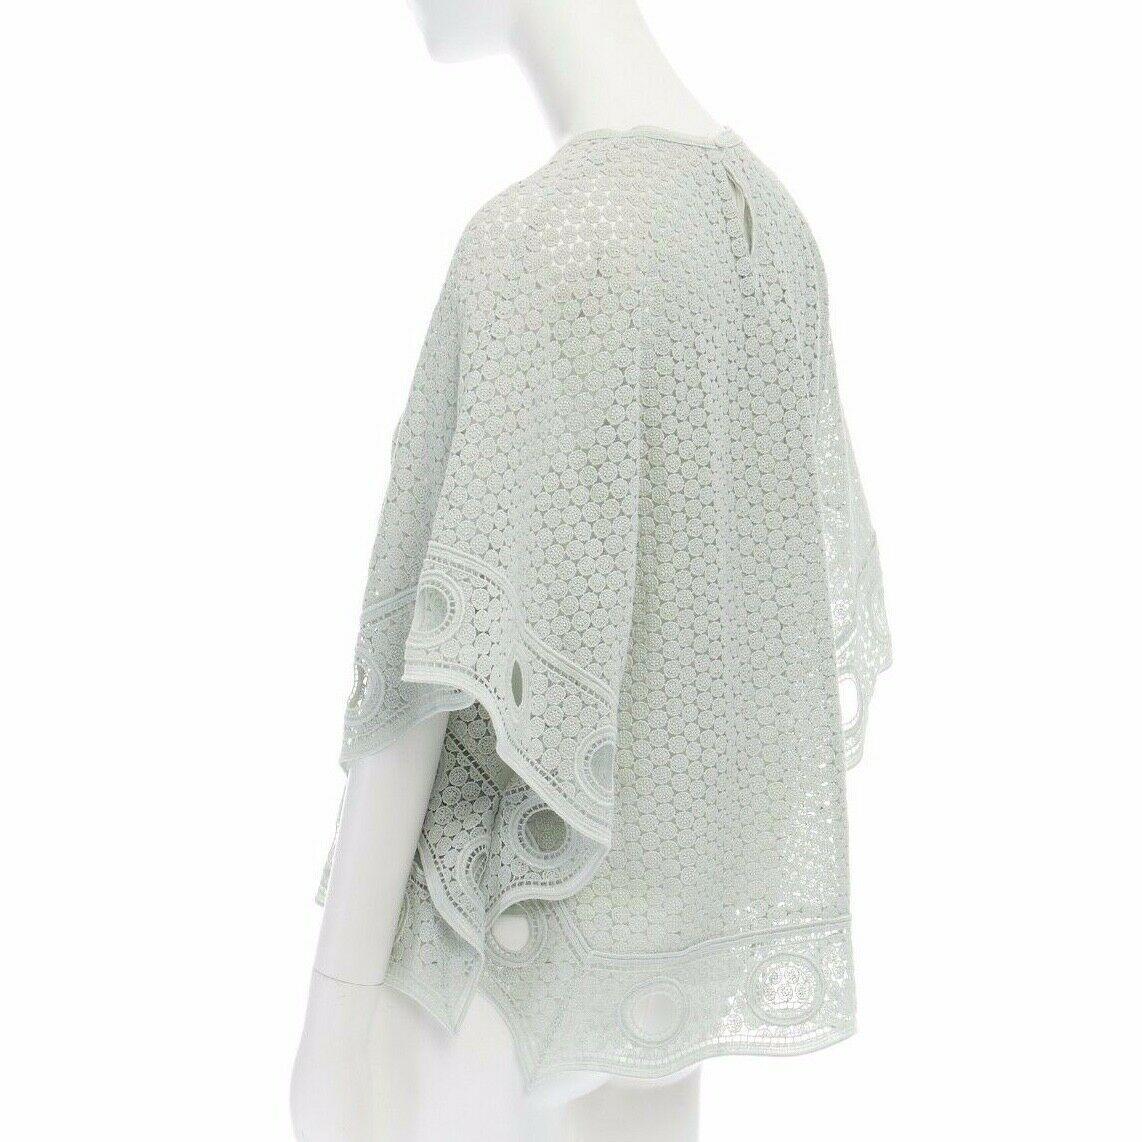 runway CHLOE SS15 teal blue crochet lace knit poncho capelet top FR36 US4 UK8 S 3